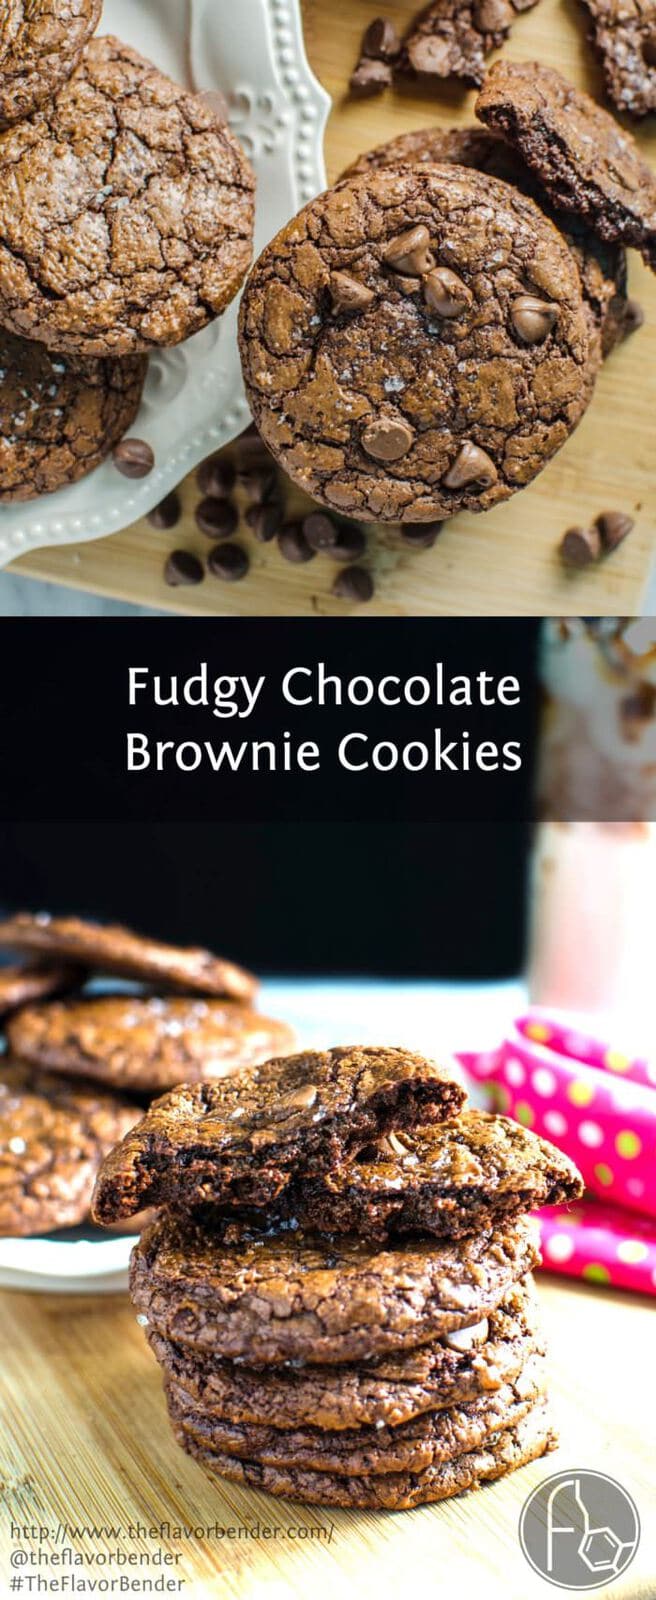 Fudgy Brownie Cookies - You never have to choose between cookies and brownies again! You can have them both with these Super Chocolatey & Fudgy Brownie Cookies! #TheFlavorBender Click to get the recipe now, or Repin it for later!